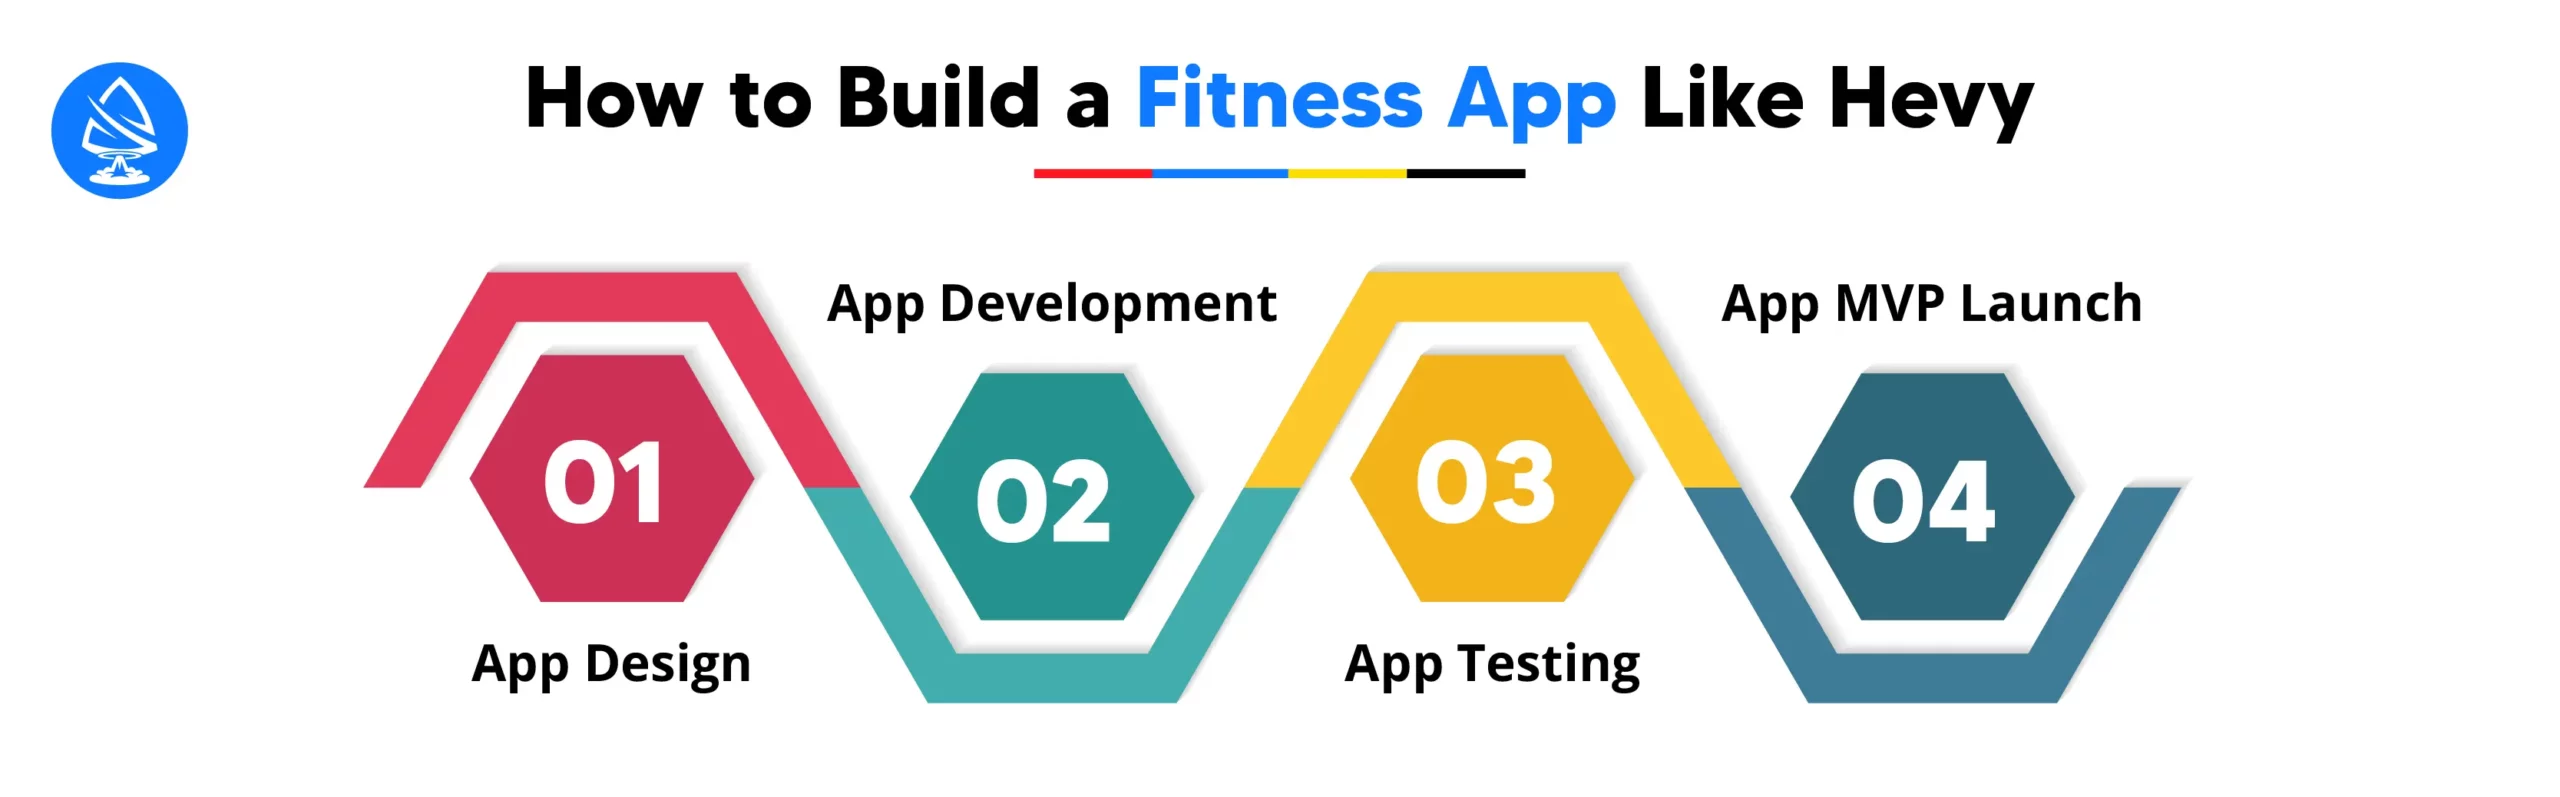 How to Build a Fitness App Like Hevy